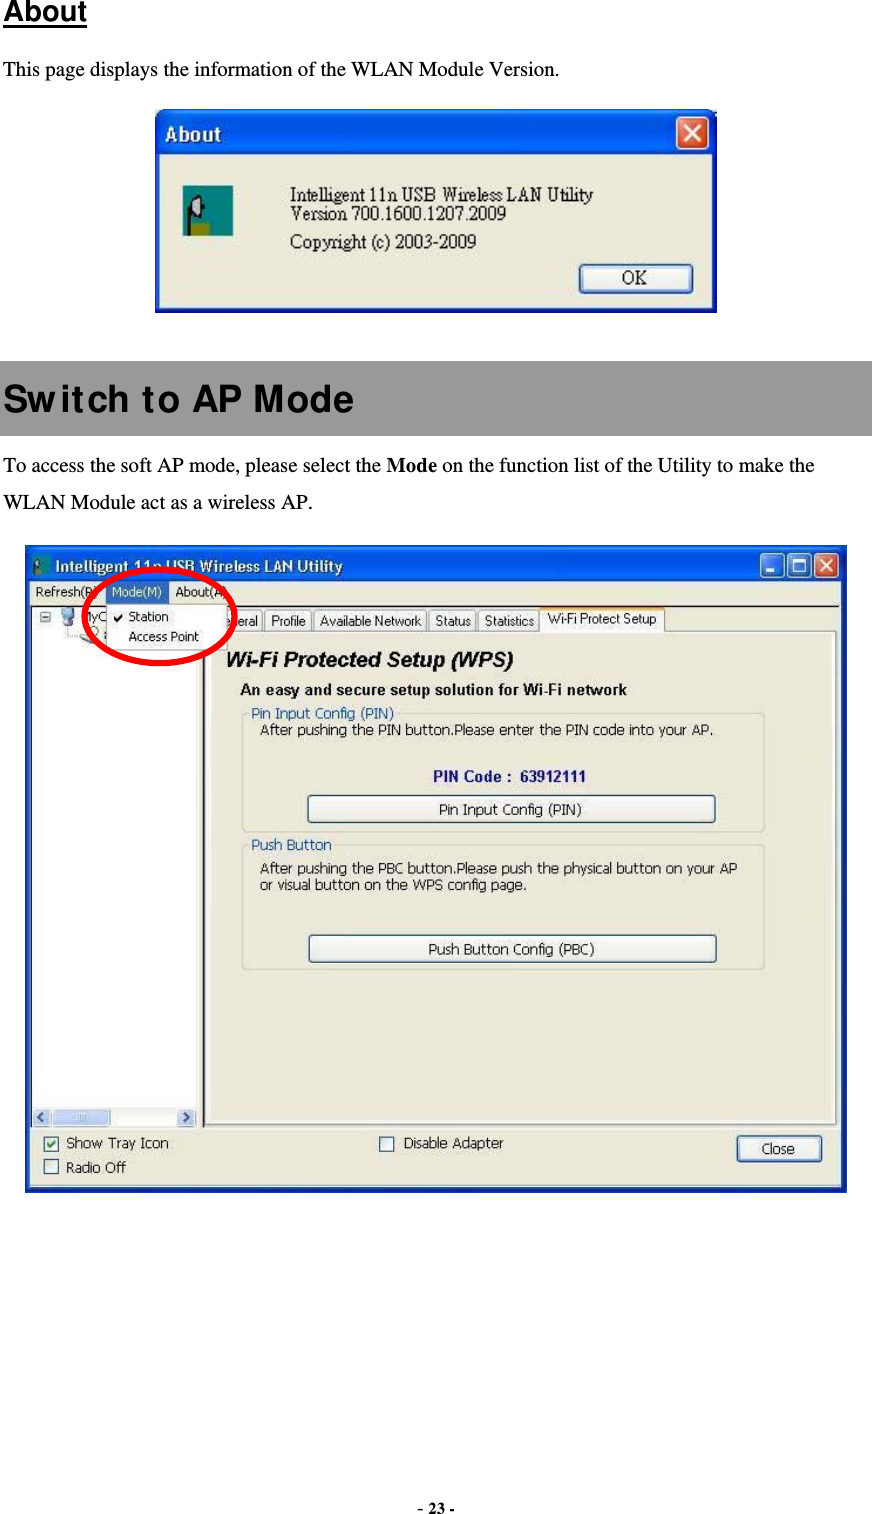  - 23 -  About This page displays the information of the WLAN Module Version.   Switch to AP Mode To access the soft AP mode, please select the Mode on the function list of the Utility to make the WLAN Module act as a wireless AP.   